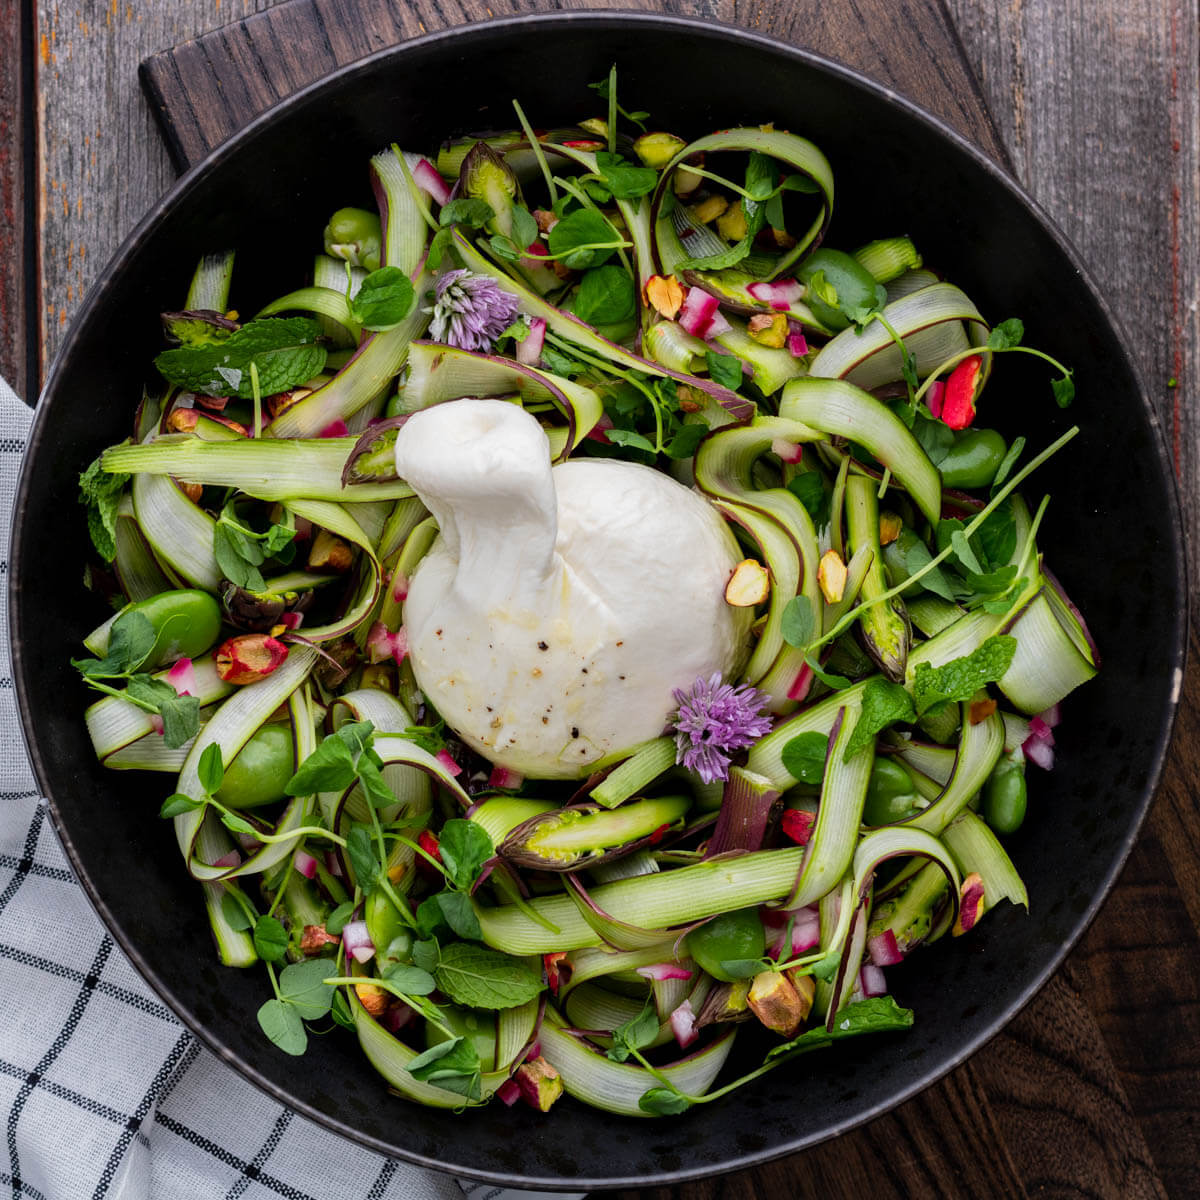 A wide black bowl filled with purple and green shaved asparagus salad, topped with a ball of fresh white burrata.